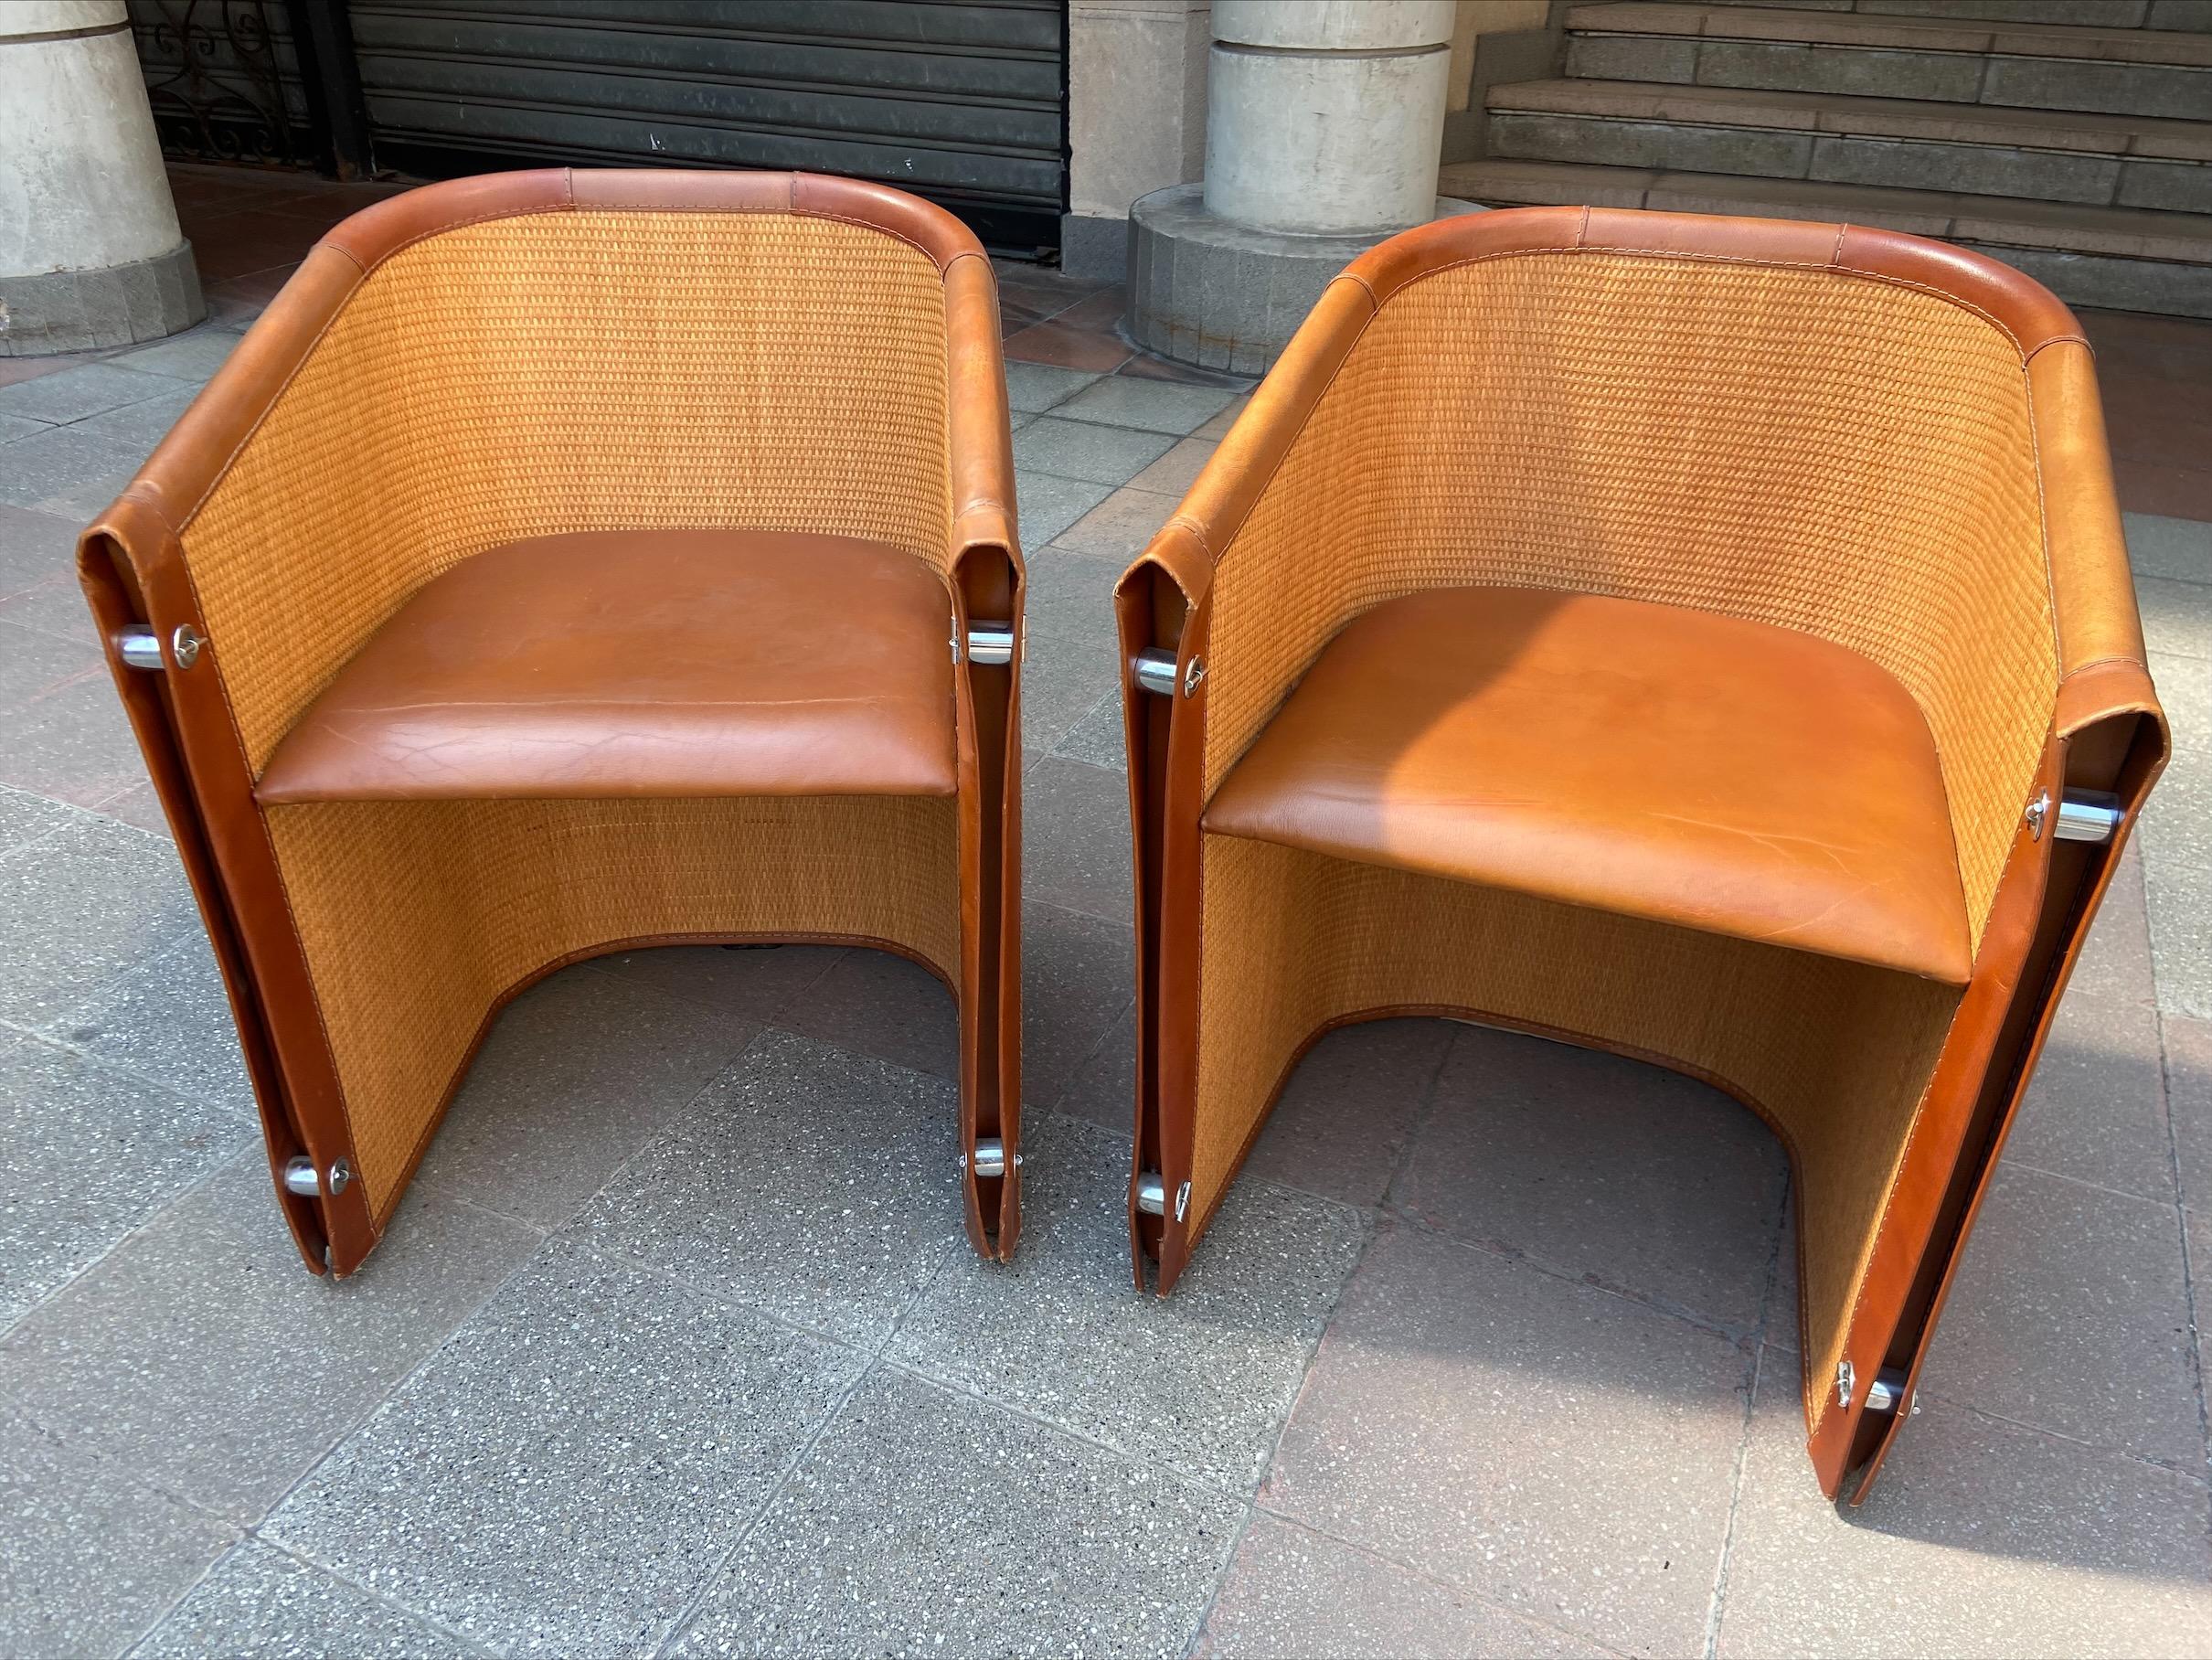 Pair of Lario model club armchairs - Giuseppe Viganò.
Leather and rattan core.
Bonacina Edition.
Circa 2000.
Measures: H 77 x W 55 x D 60 cm.
Note some signs of wear on a leather armrest as well as on the leather of one of the seats
Over the